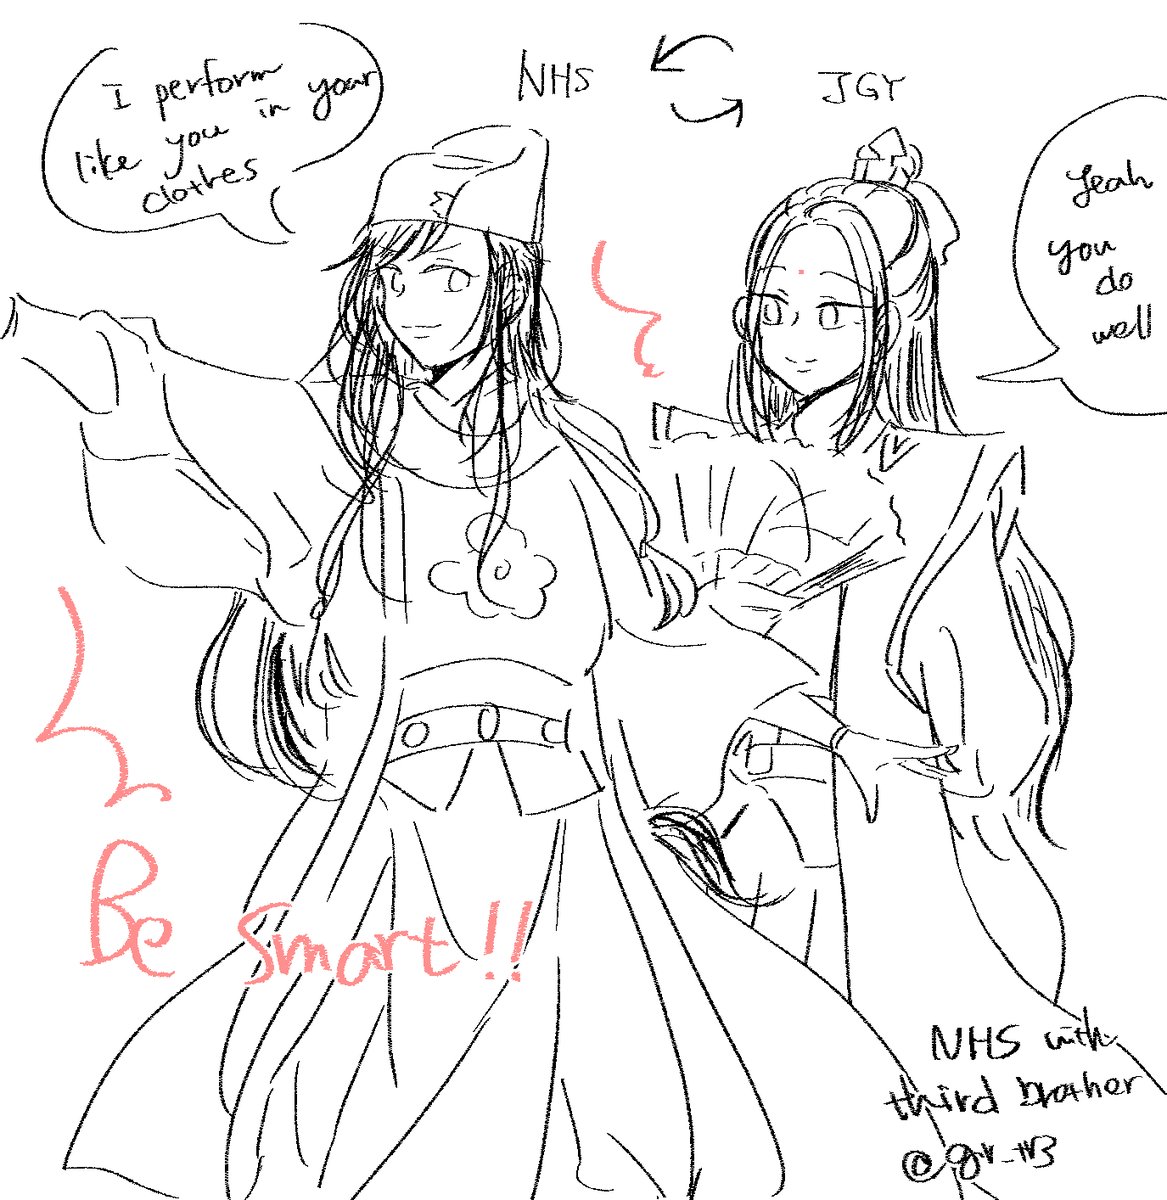 they chenge their clothes👚🔁🧥

#NHS #JGY #MDZS(二枚目は本家) 